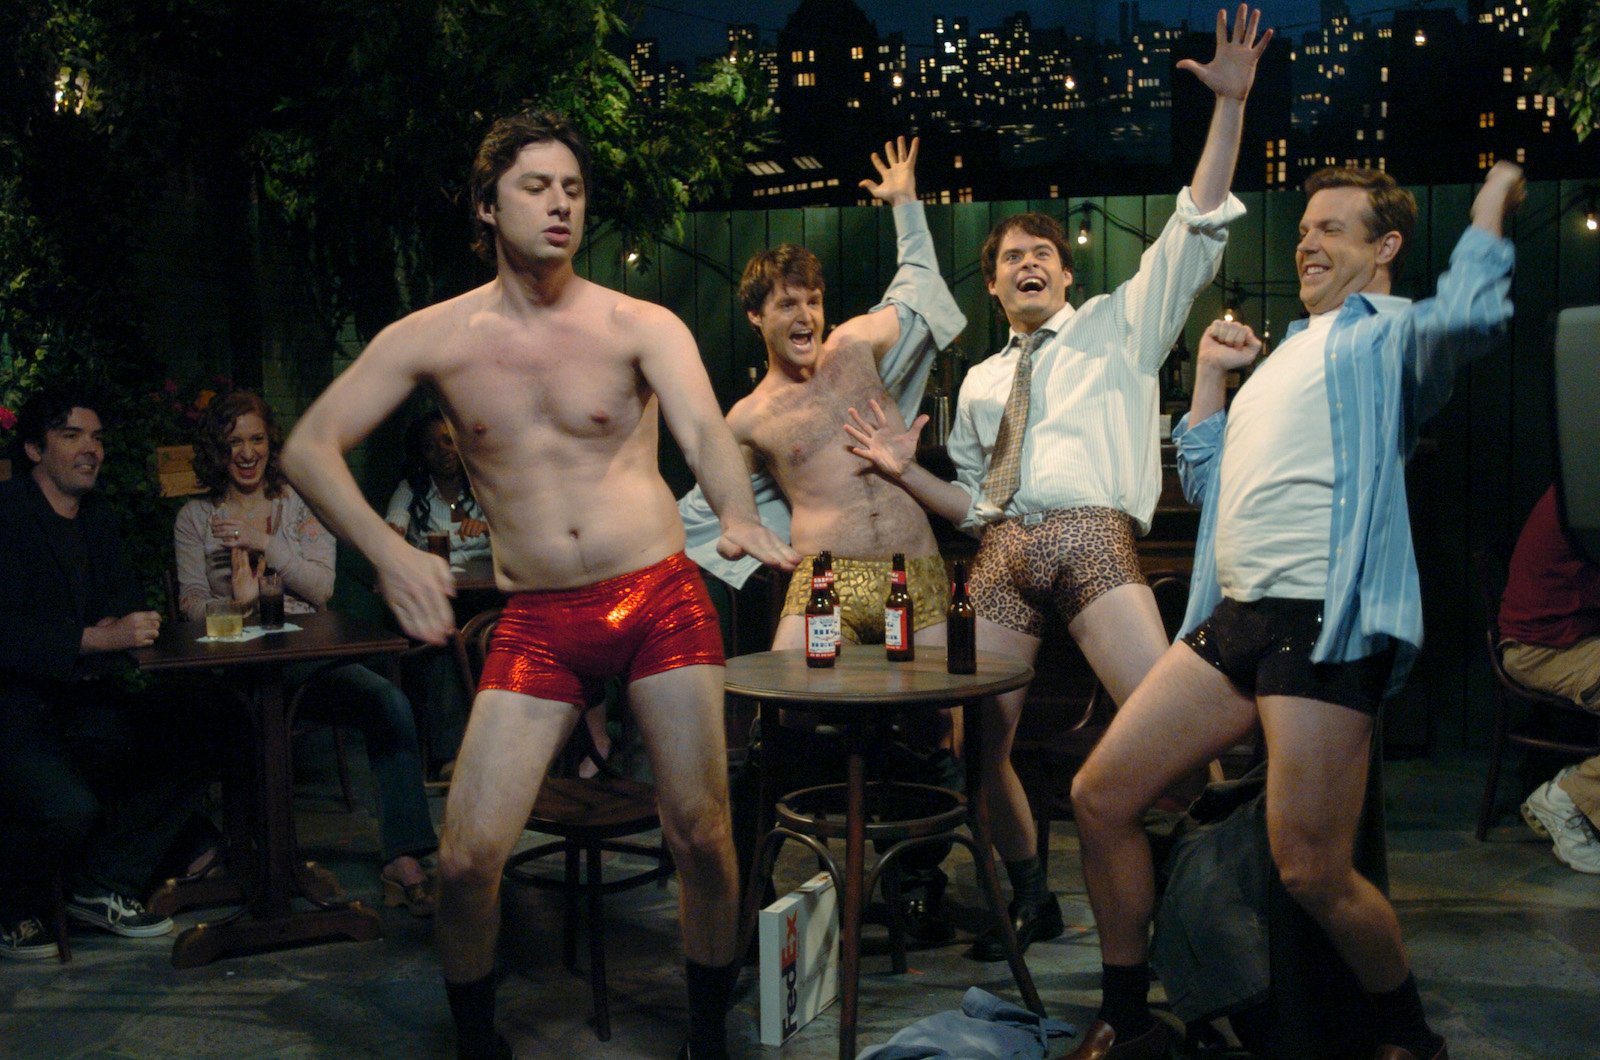 Jason Sudeikis's SNL dances are featured in a slew of sketches. Including one with Zach Braff, Will Forte, and Bill Hader in 2007